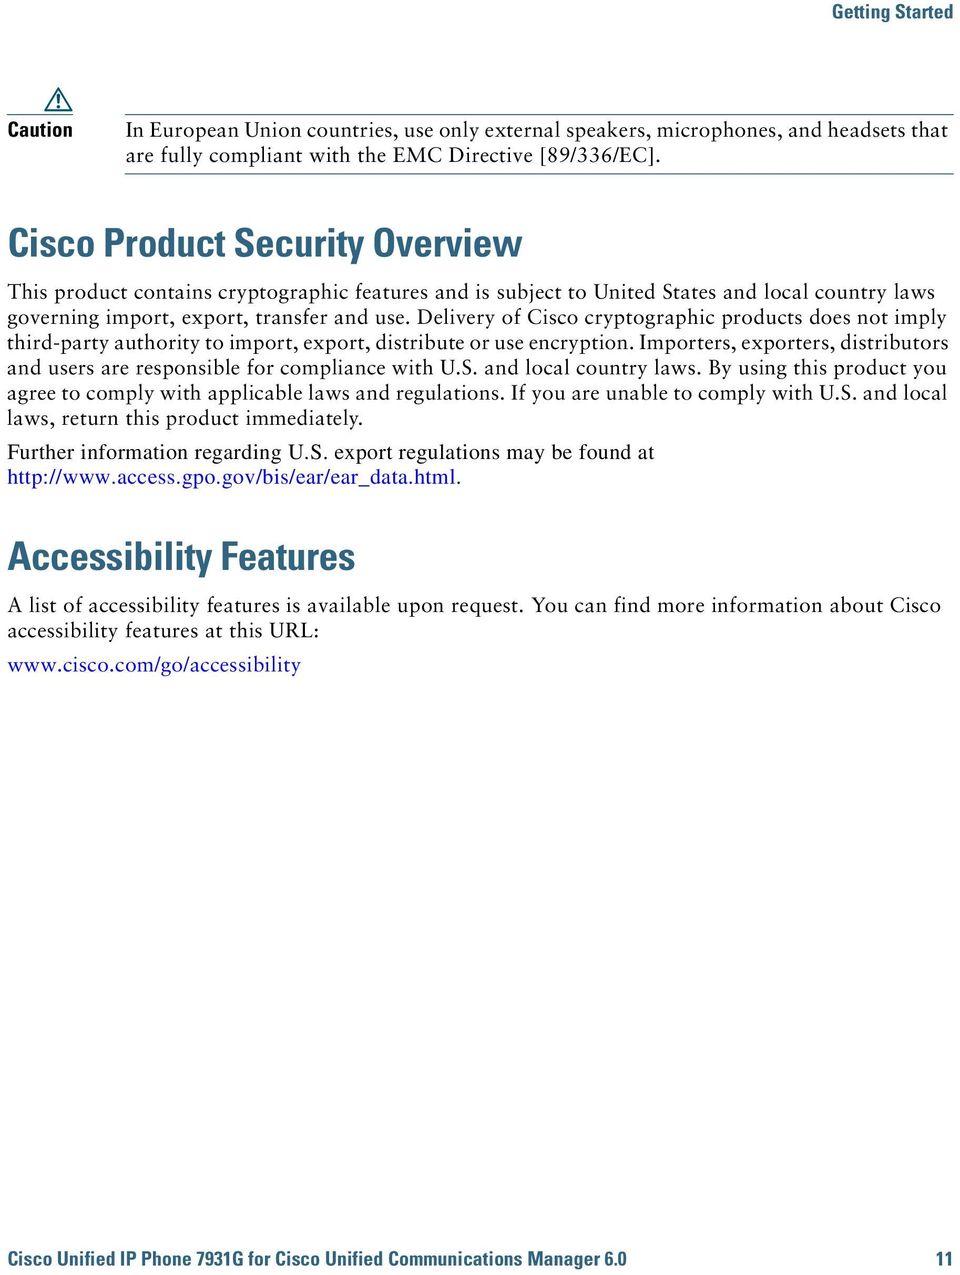 Delivery of Cisco cryptographic products does not imply third-party authority to import, export, distribute or use encryption.